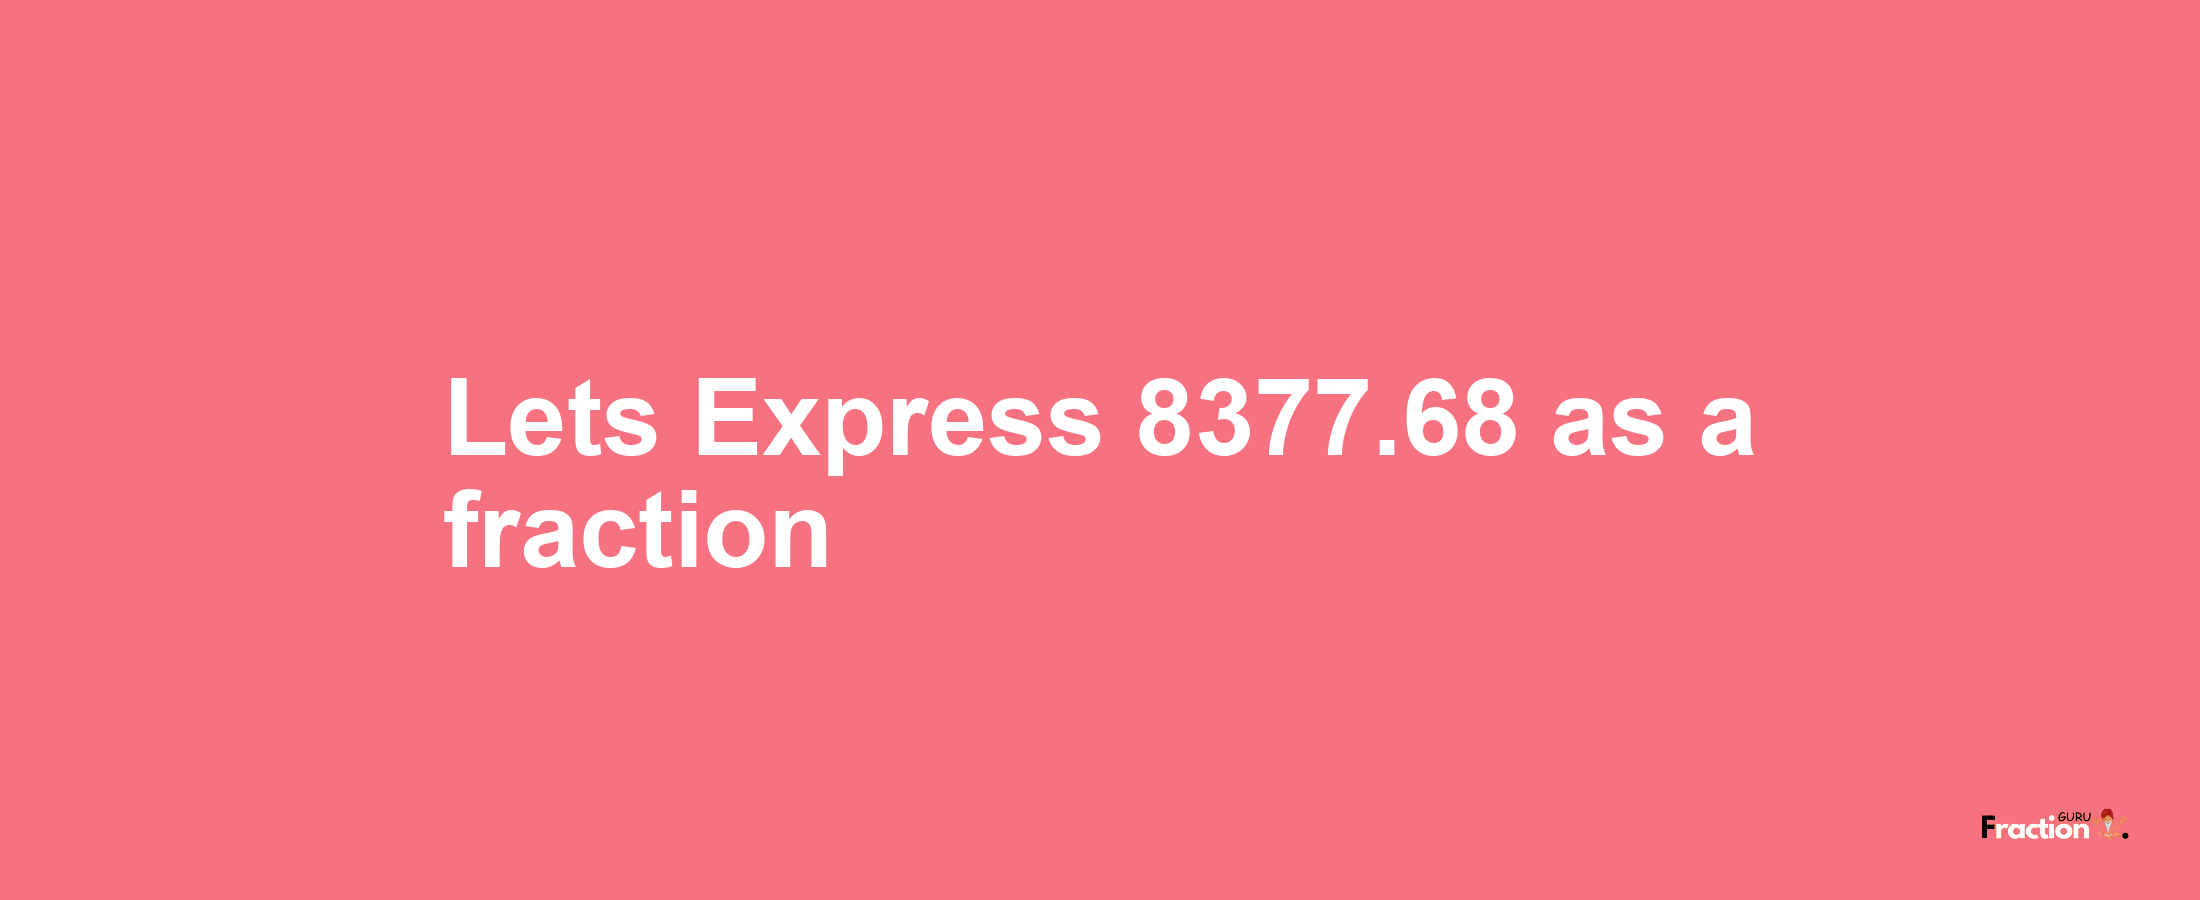 Lets Express 8377.68 as afraction